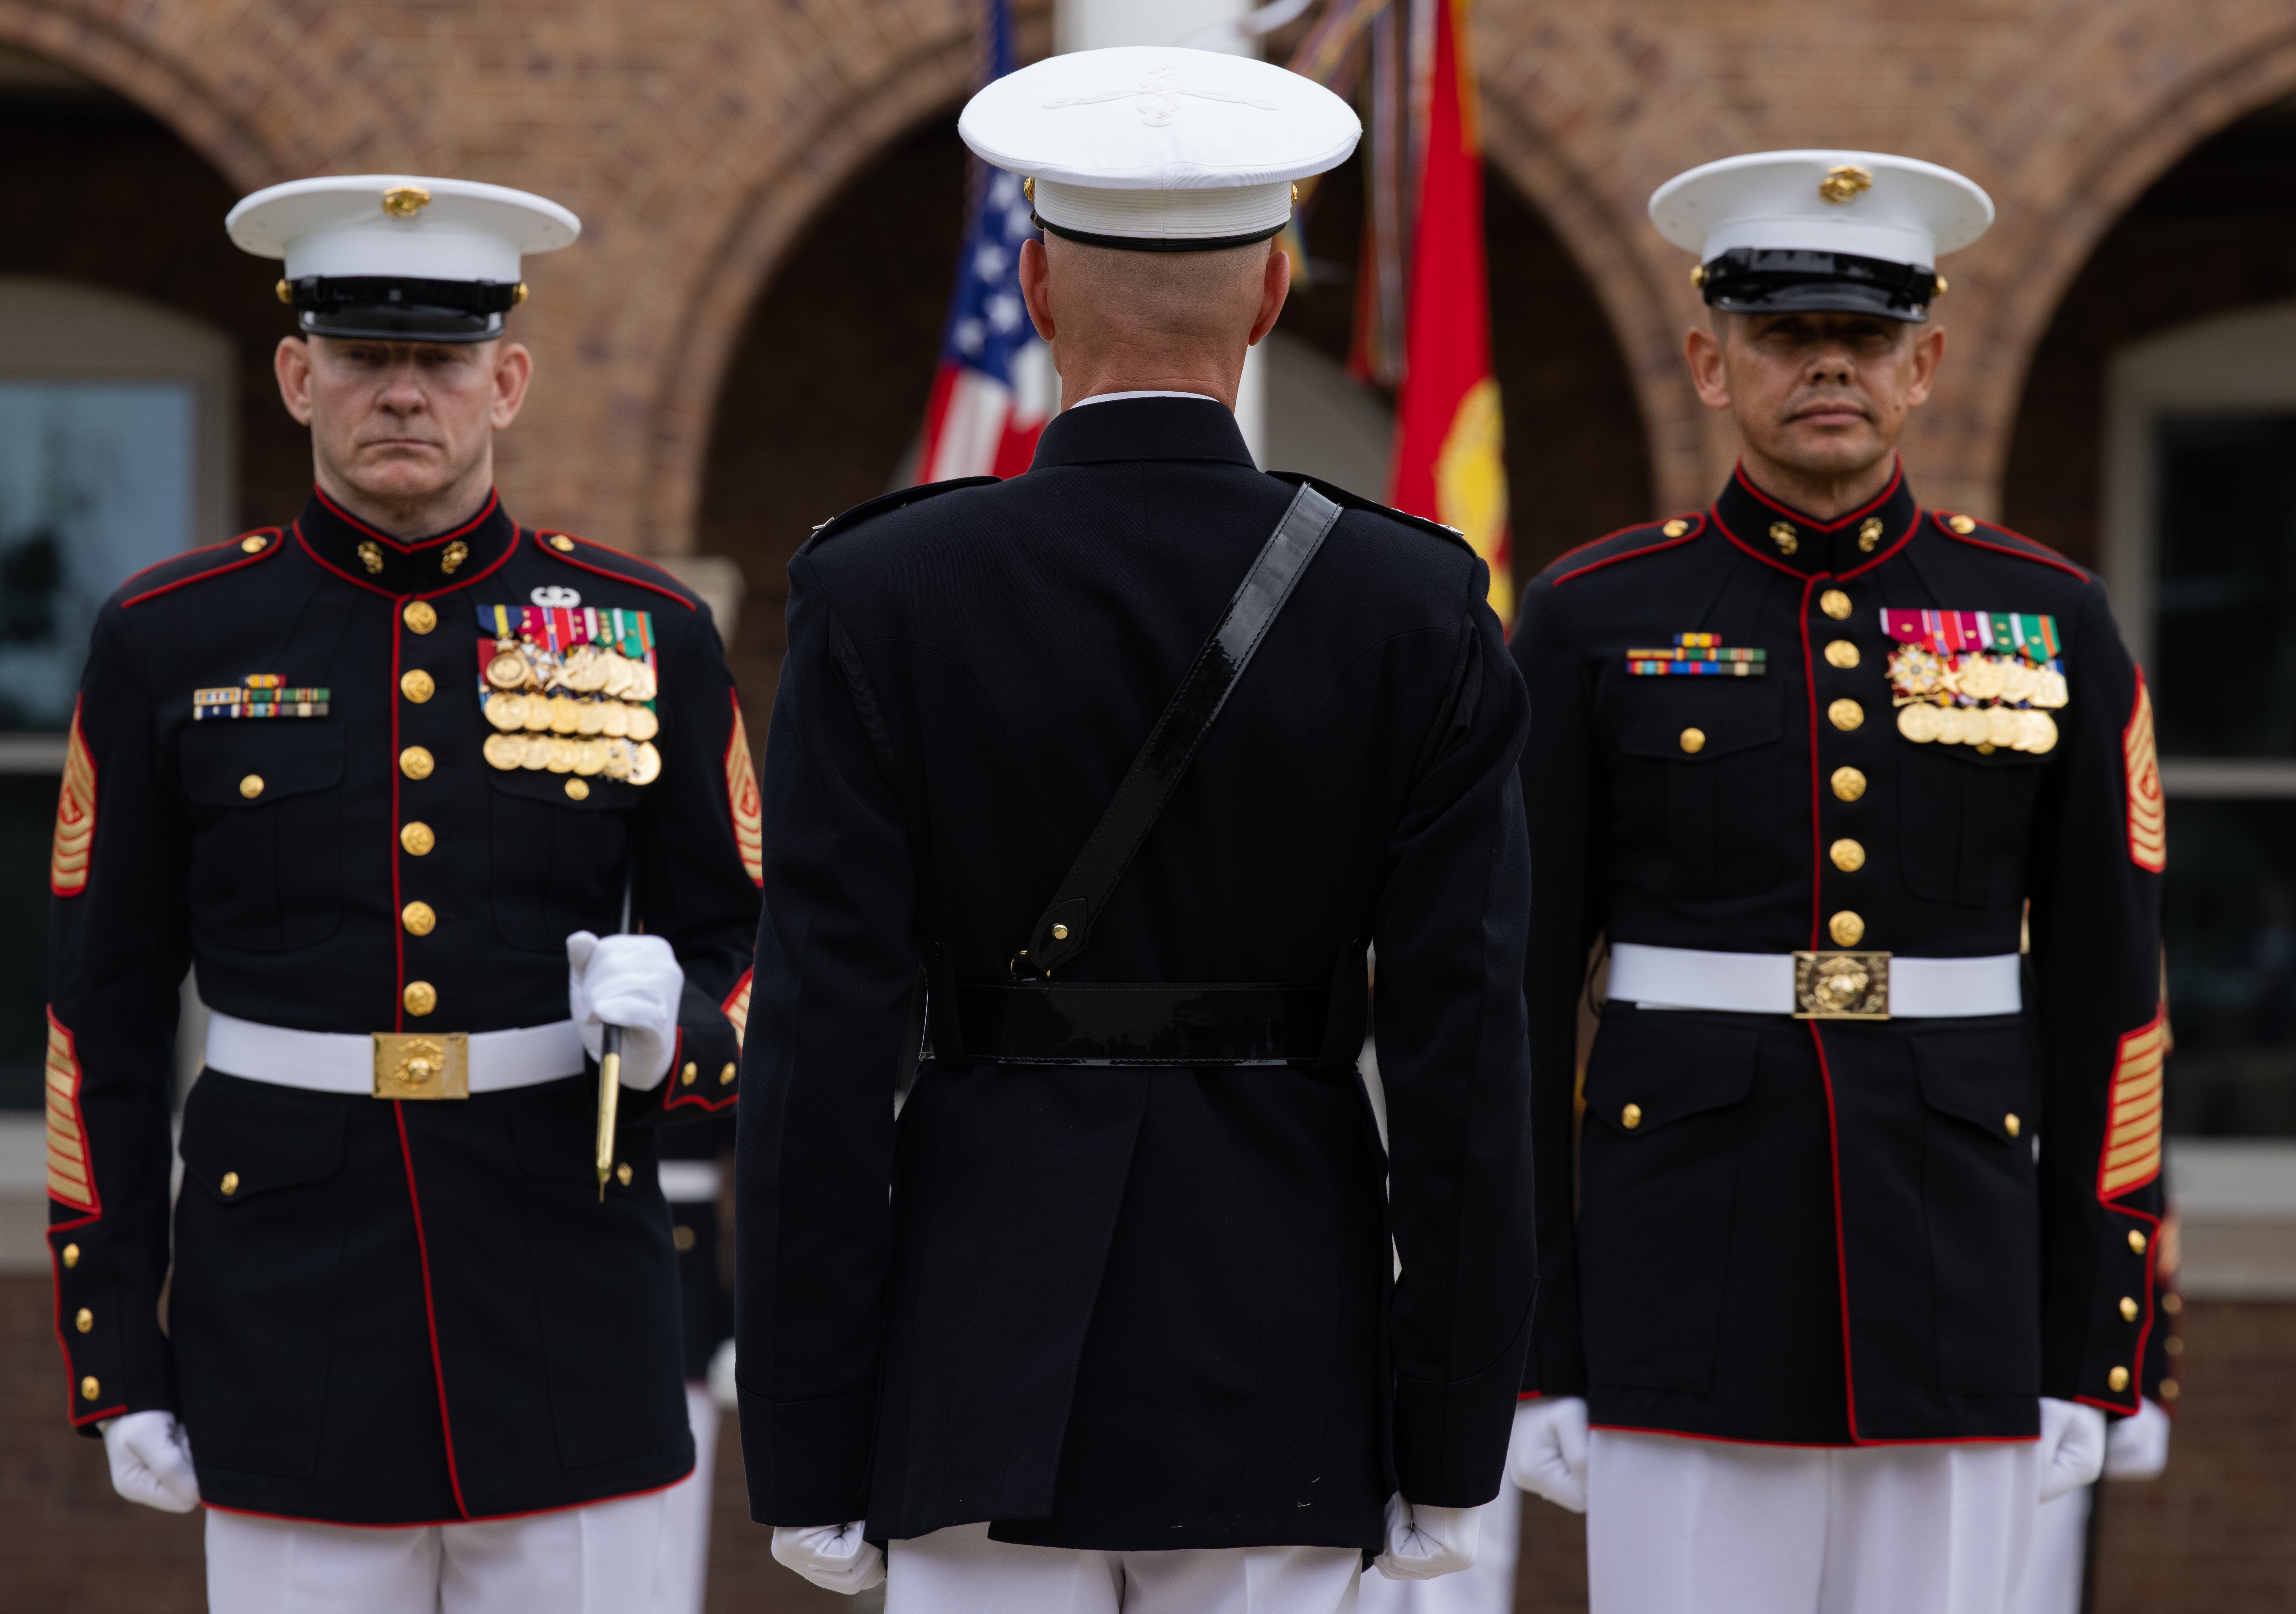 One of the Marine Corps' Most Iconic Enlisted Leaders Just Retired